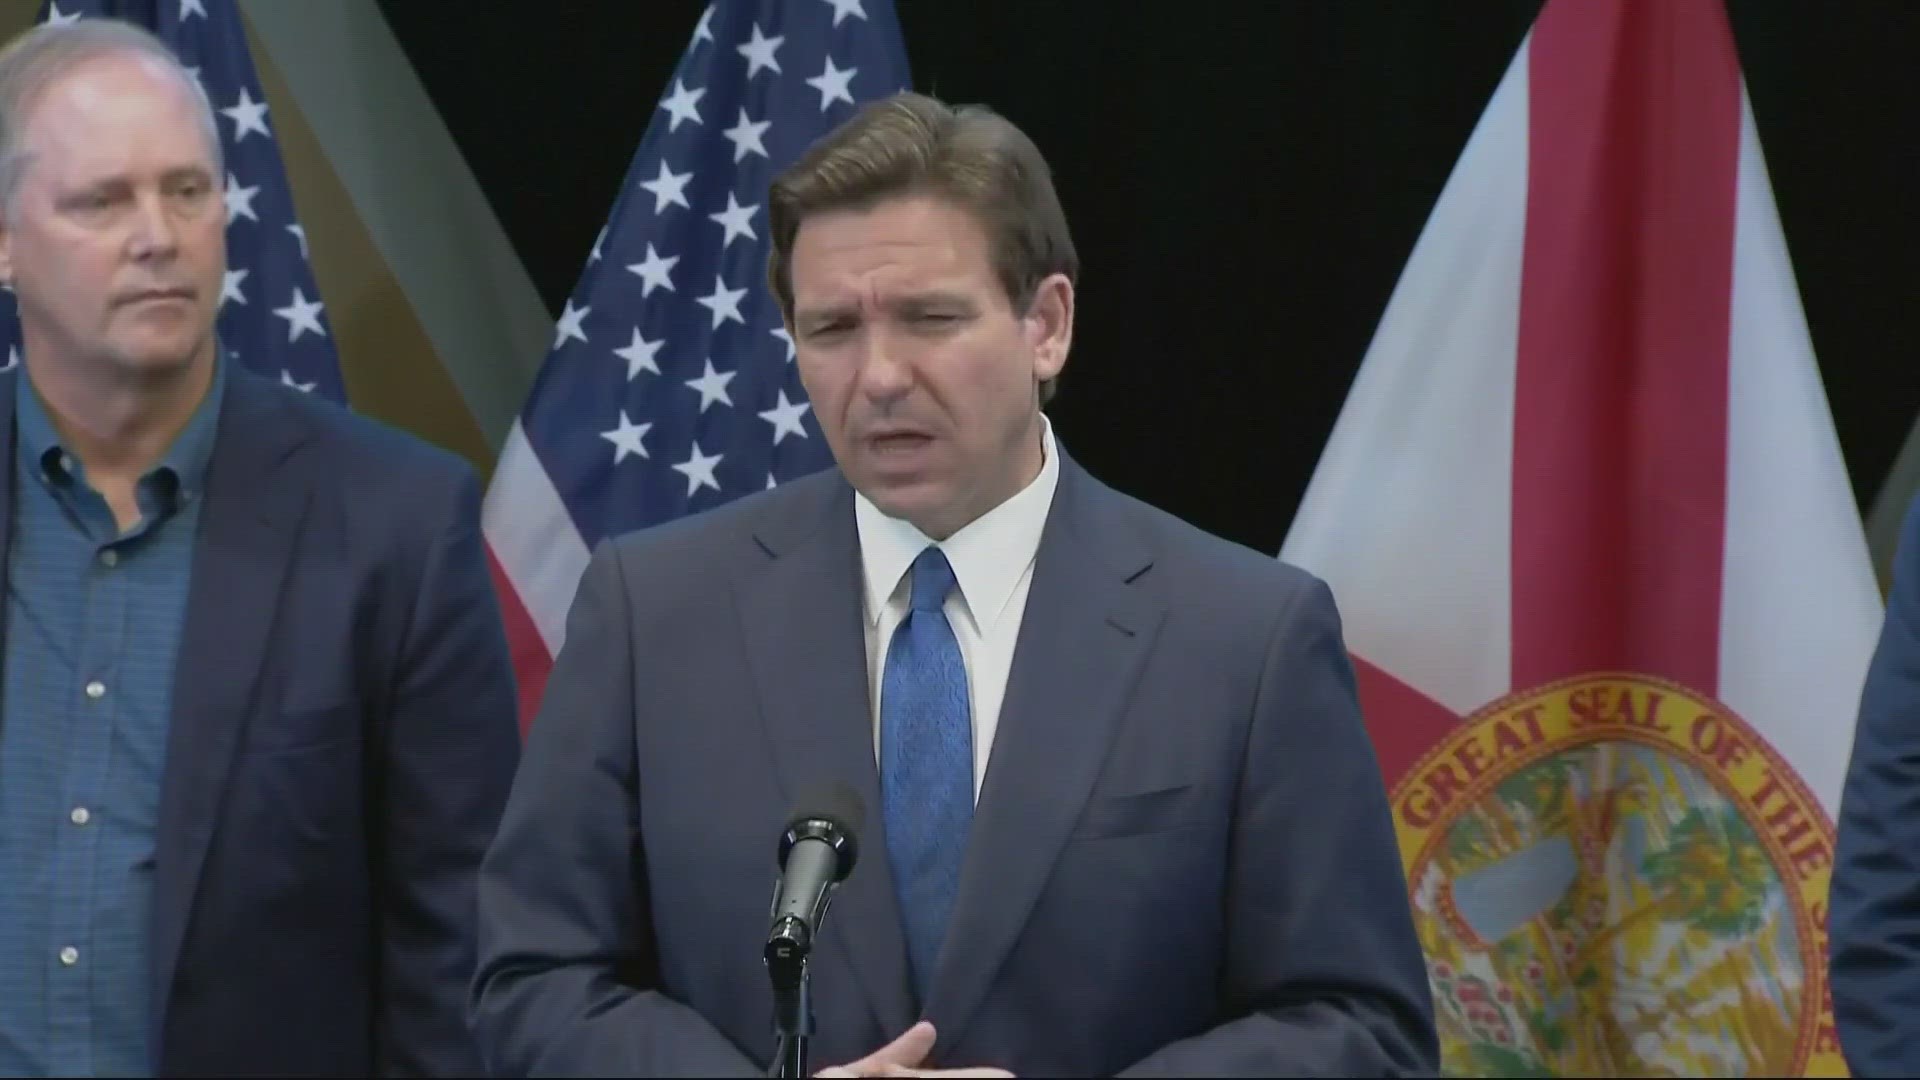 DeSantis is announcing his presidential campaign on Twitter Spaces with Elon Musk after months of dodging questions about his intentions to run for the office.